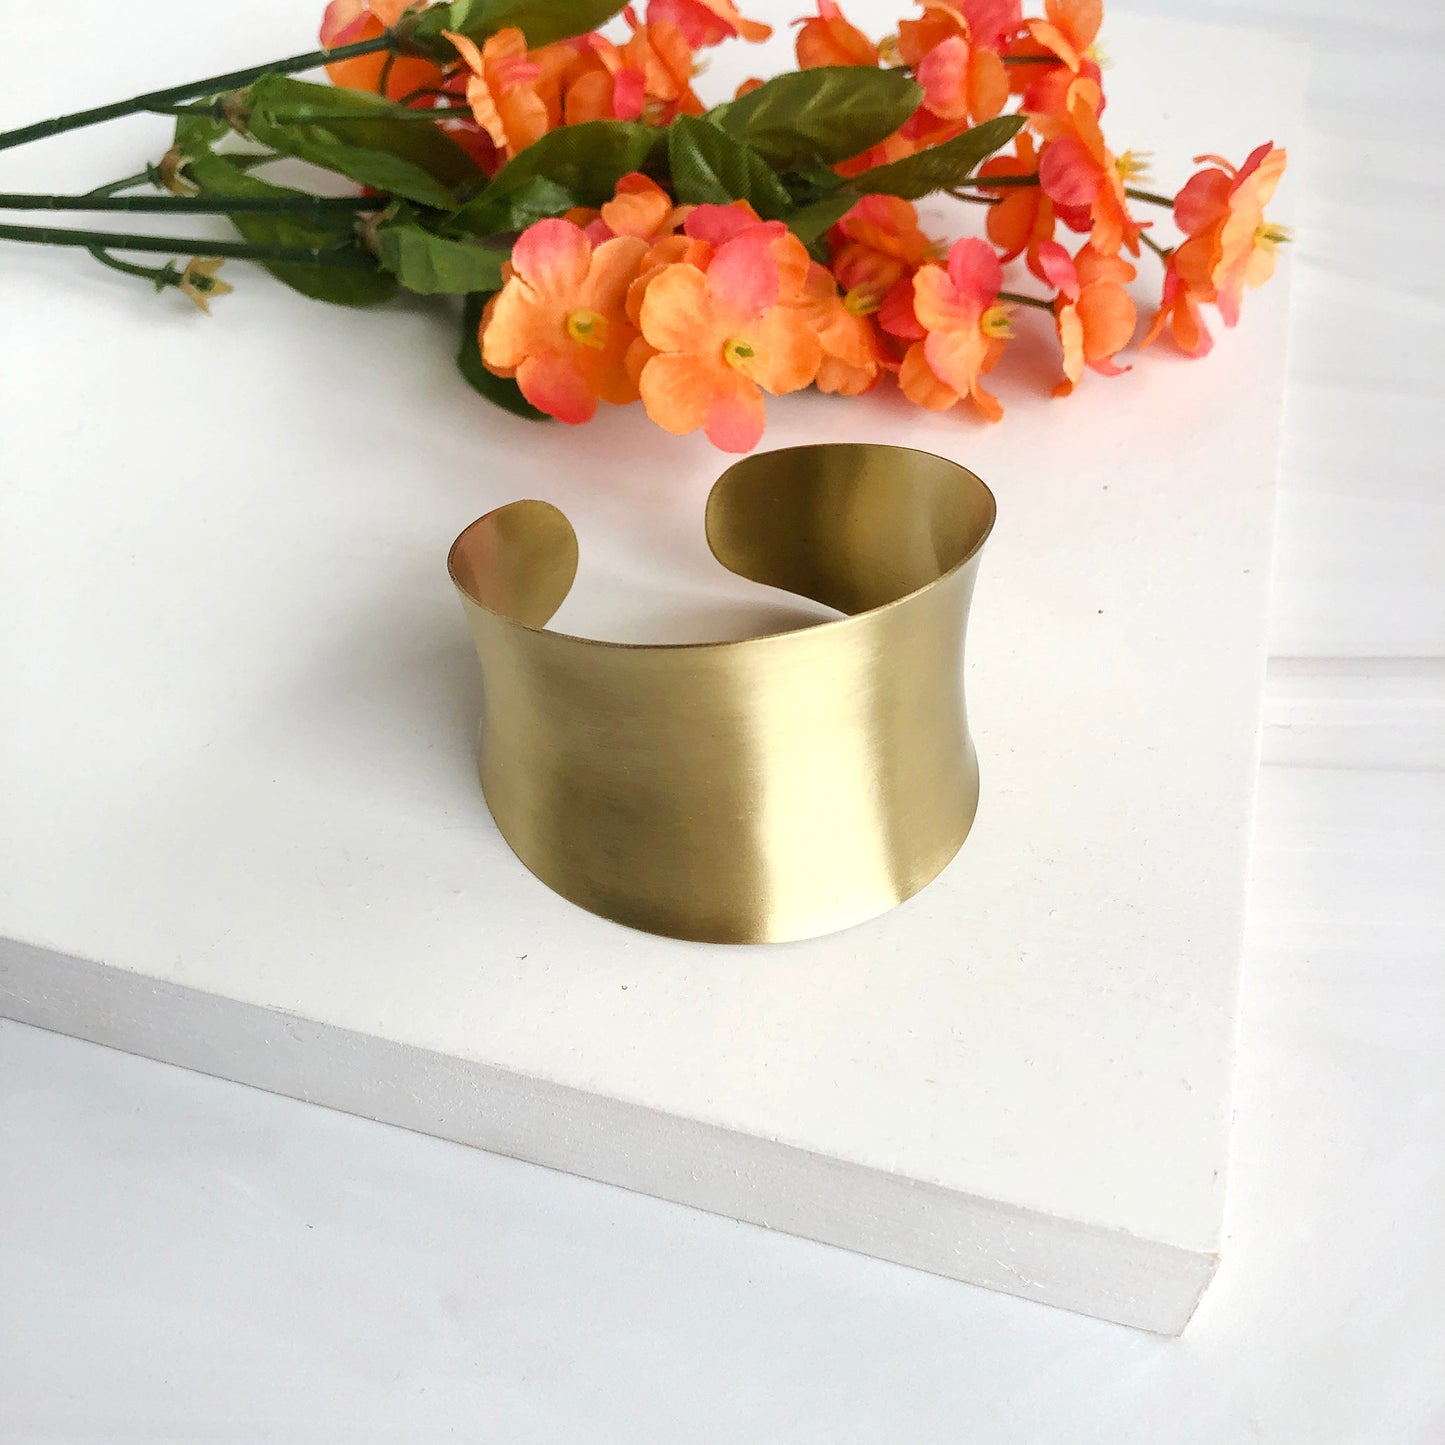 Load image into Gallery viewer, A tall gold cuff bracelet is seen with some orange flowers.
